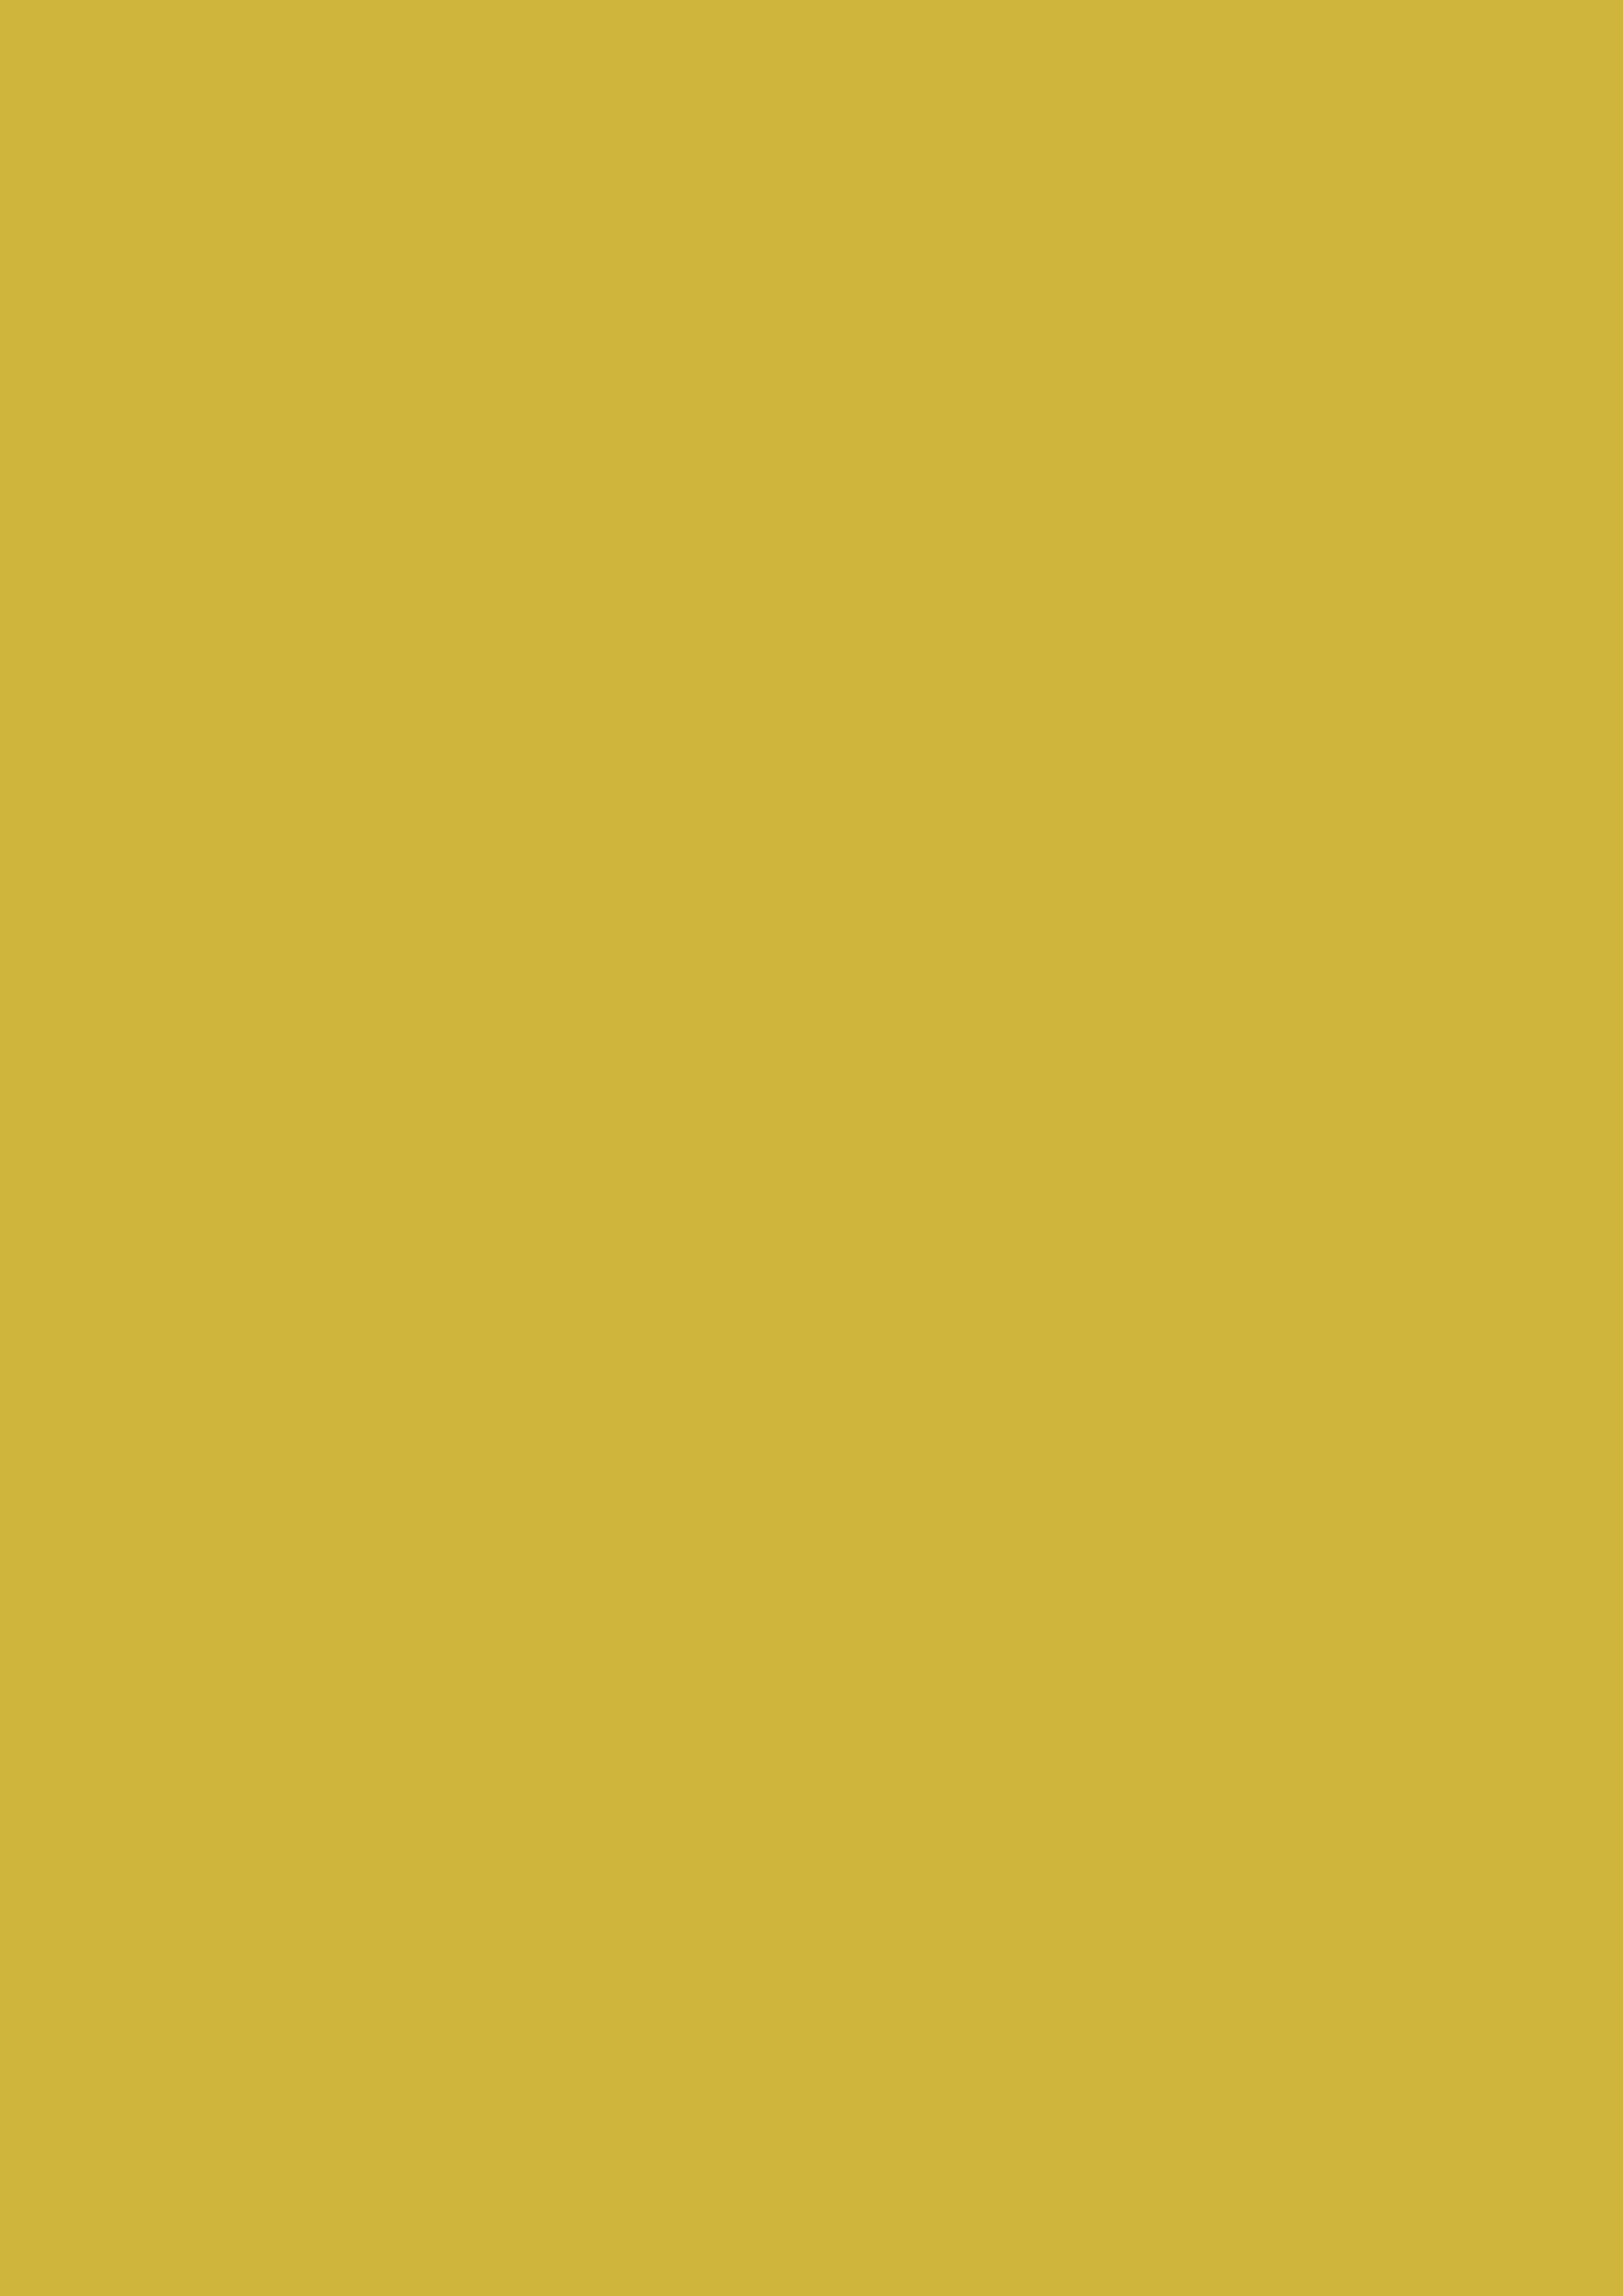 2480x3508 Old Gold Solid Color Background